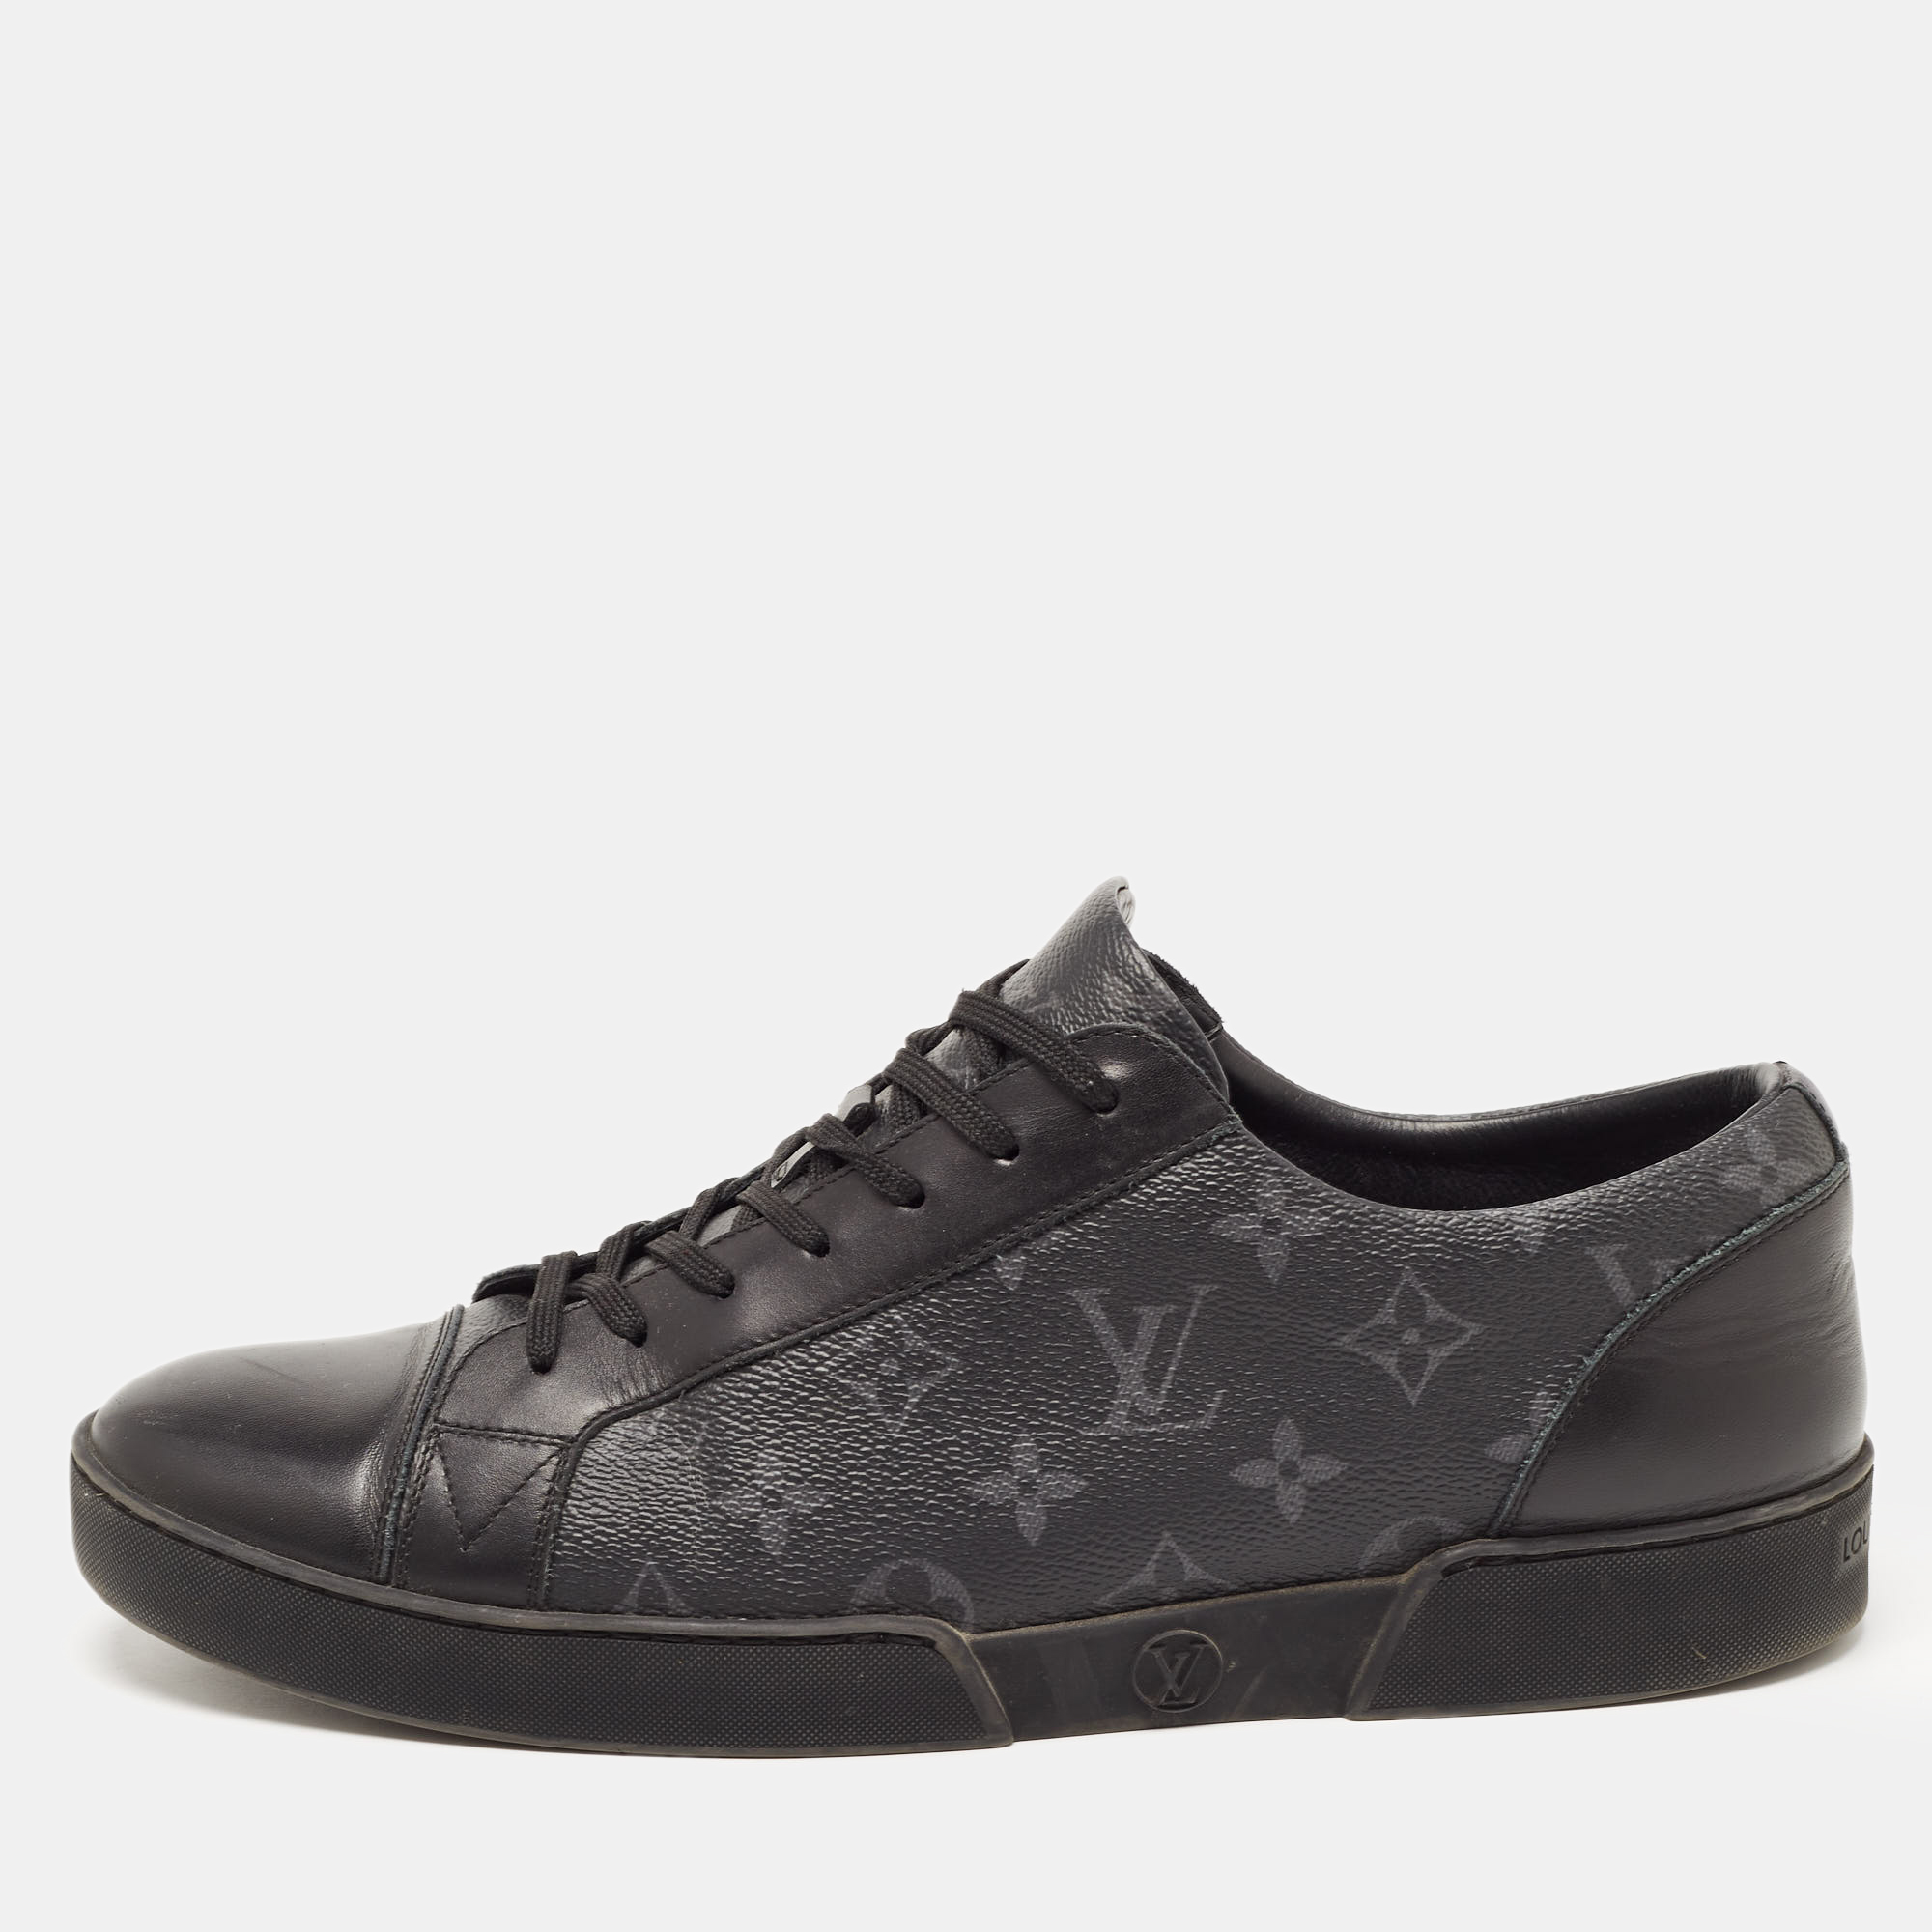 Louis Vuitton Black/Grey Leather And Monogram Coated Canvas Match Up Sneakers Size 42.5